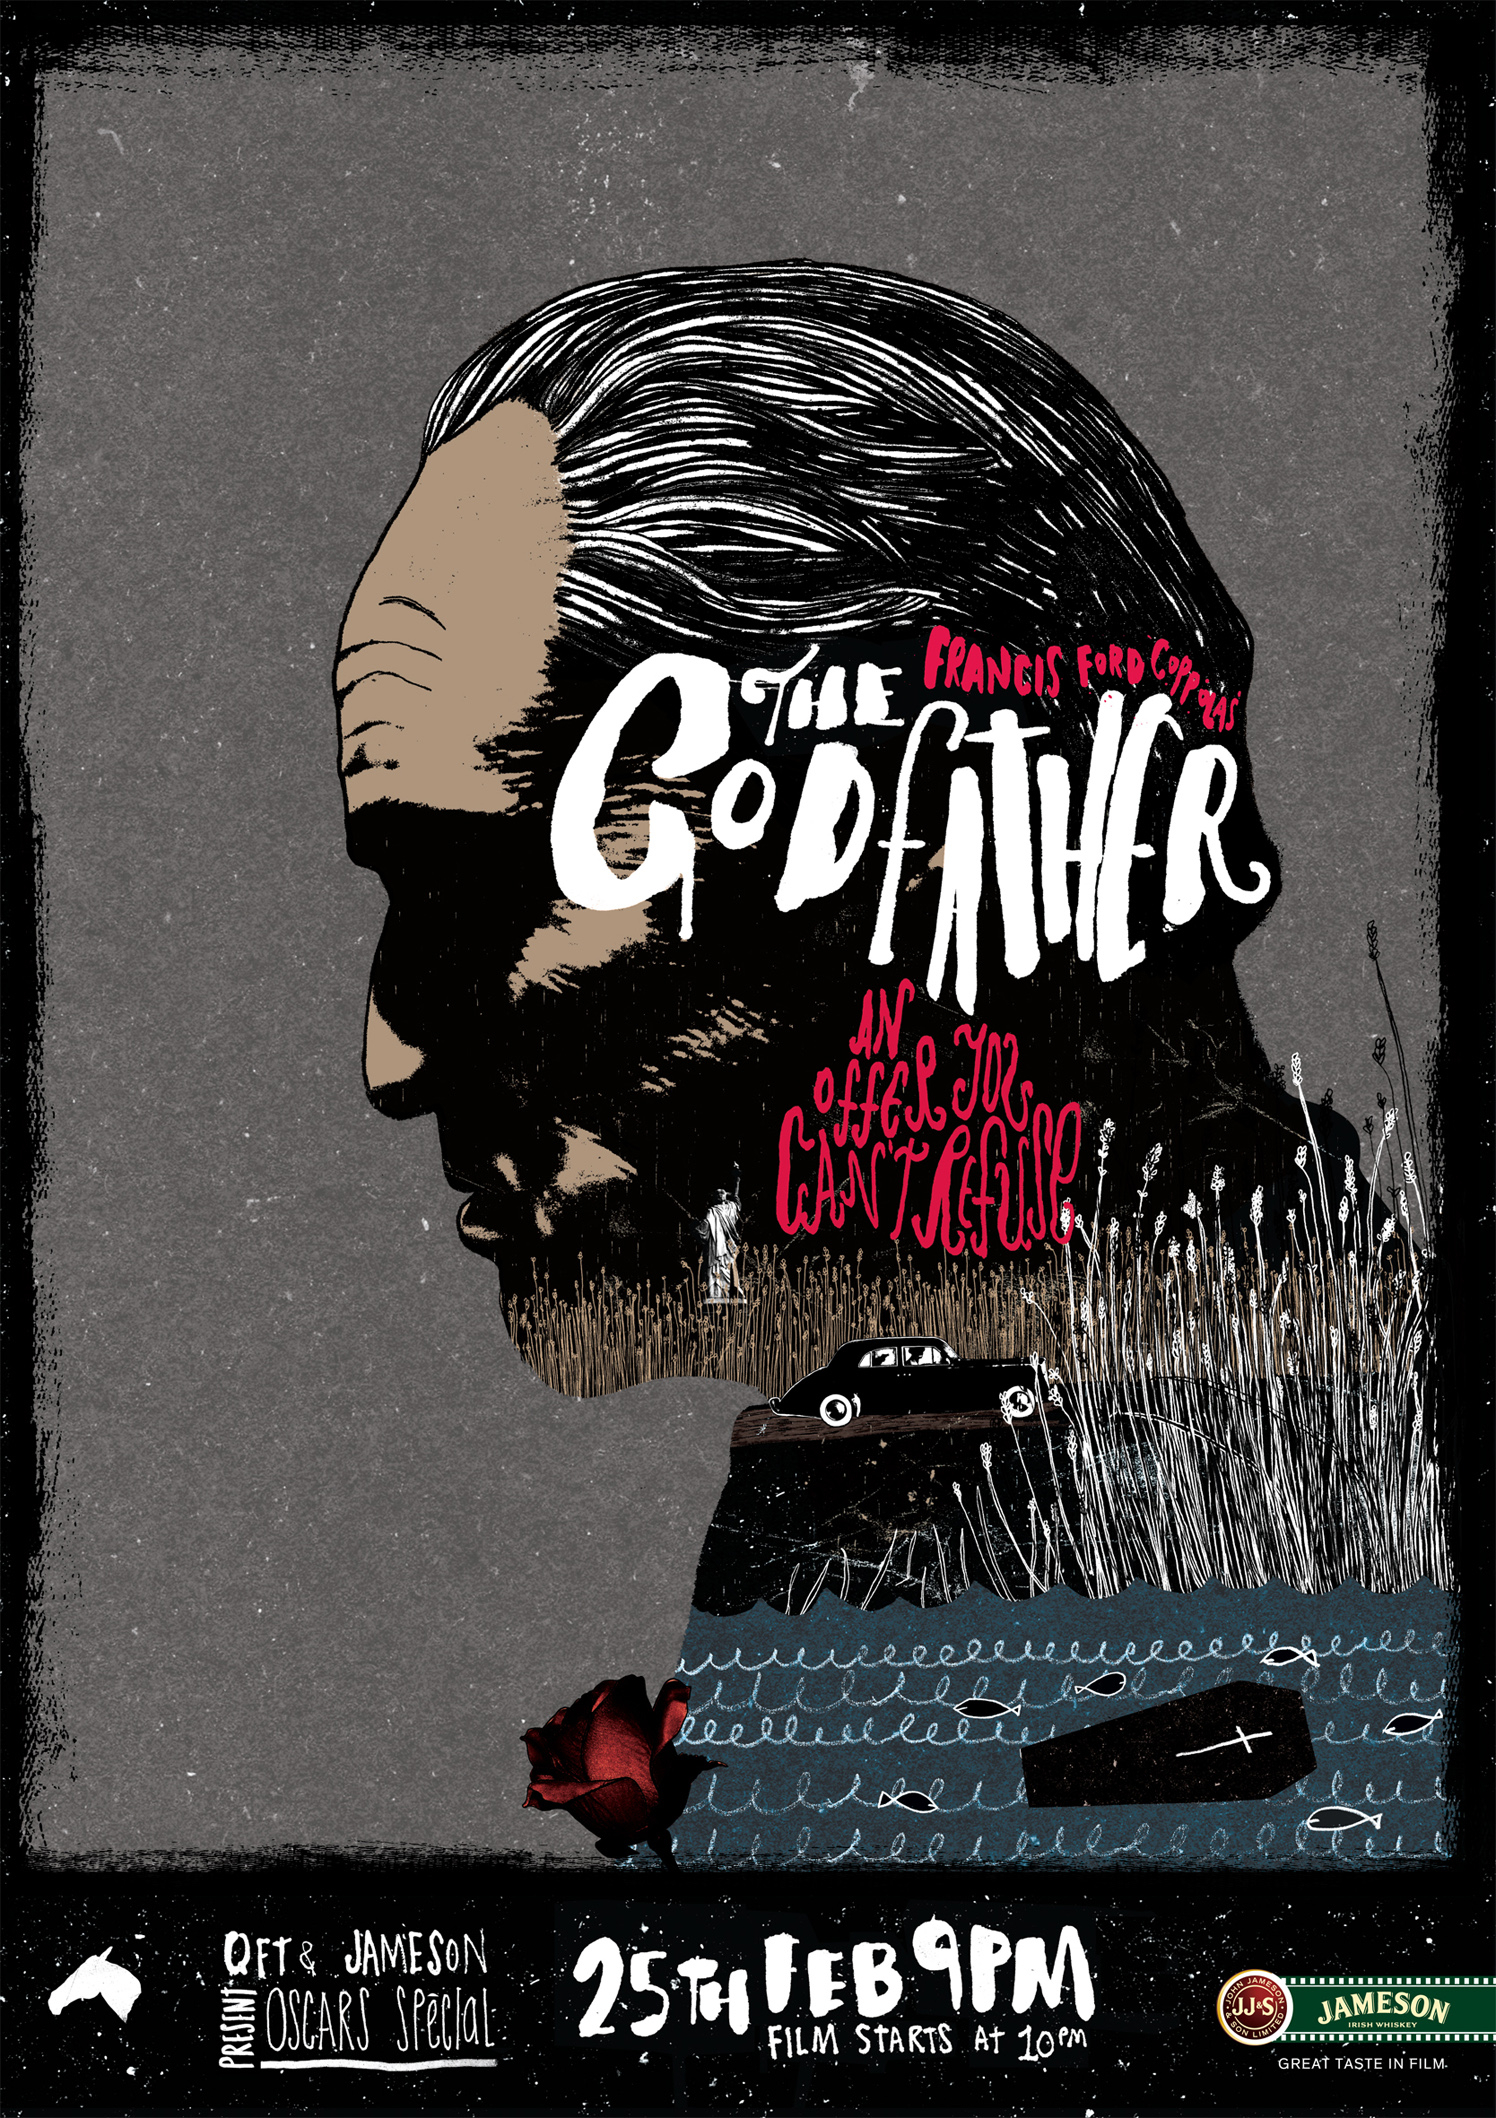 The Godfather Jameson's Poster